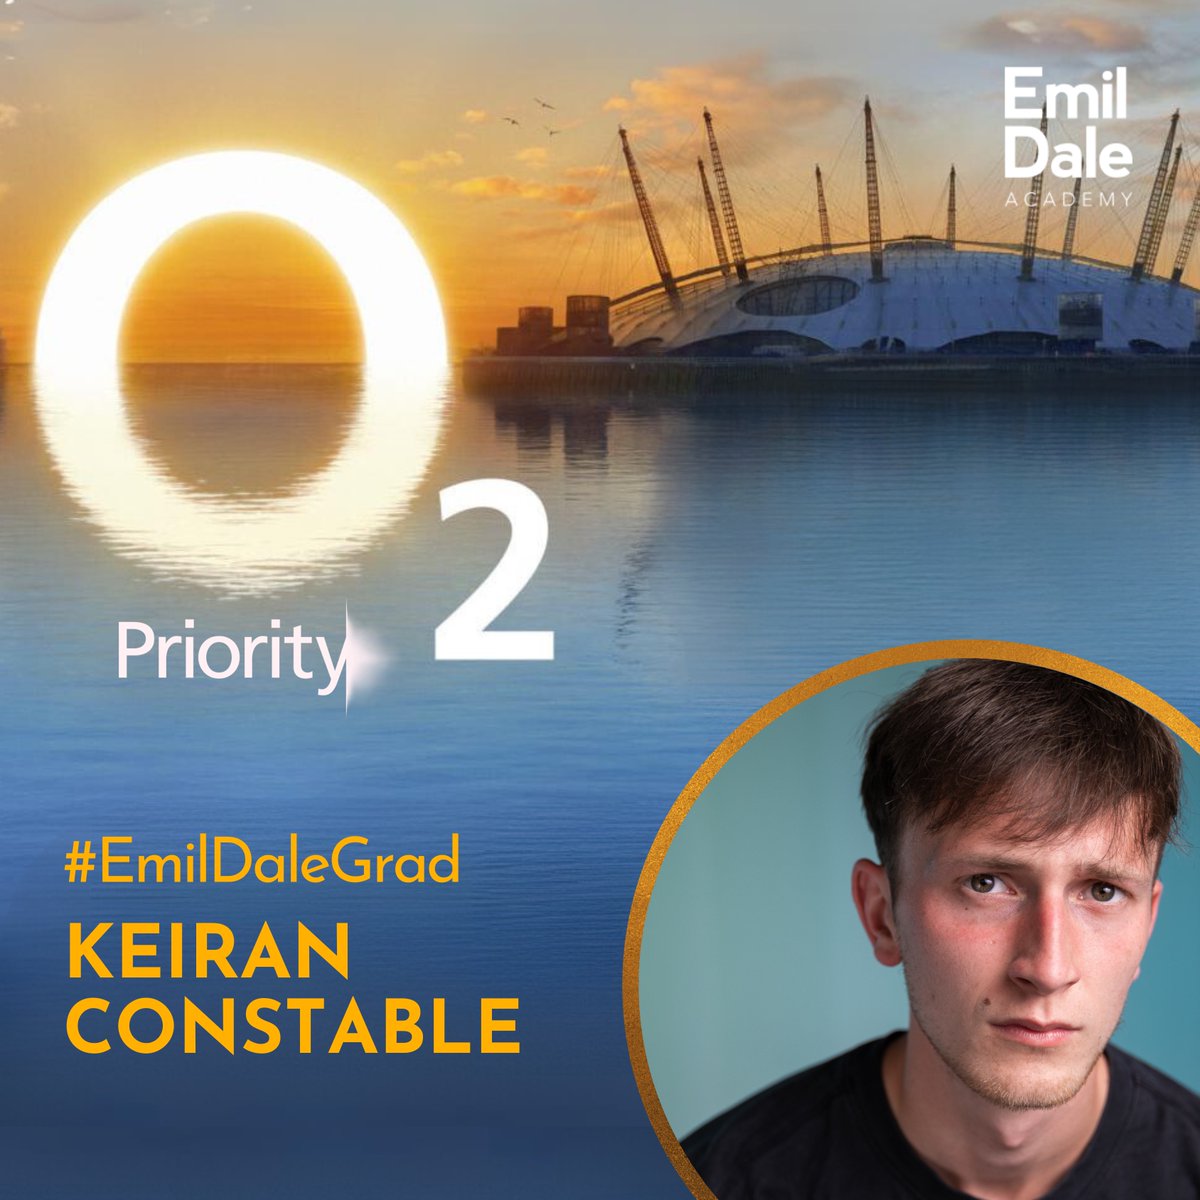 ✨ MORE GRAD NEWS! ✨ Huge congratulations to Emil Dale BA graduate Keiran Constable who can currently be seen on our screens in adverts for O2 Priority! 💫 We were already proud of you ⭐️ #theatre #emildale #musicaltheatre